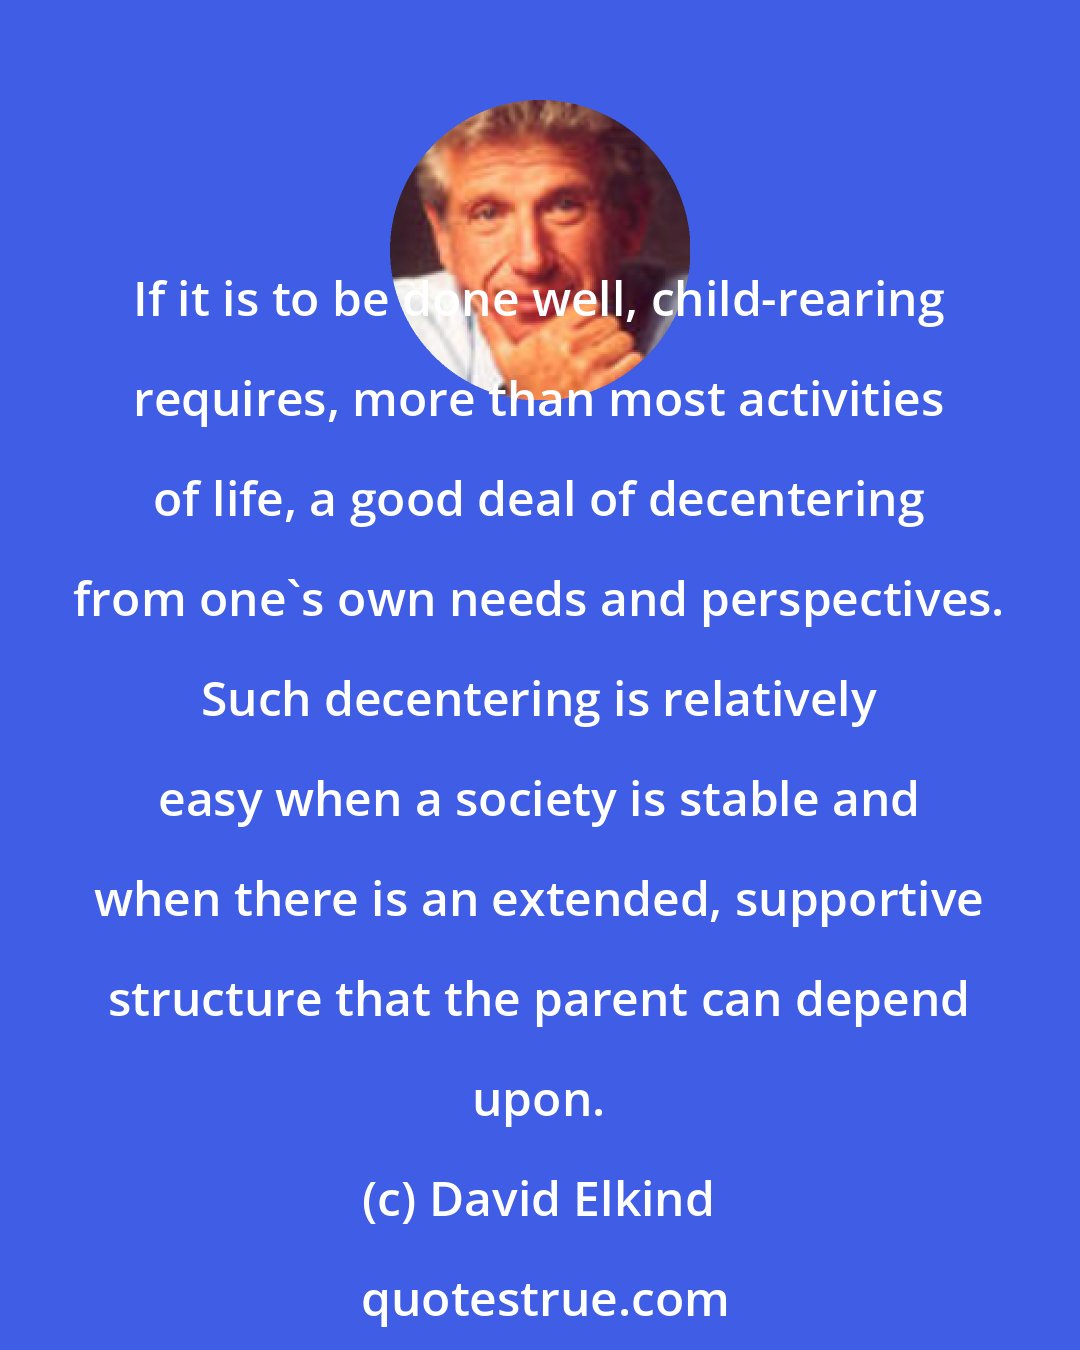 David Elkind: If it is to be done well, child-rearing requires, more than most activities of life, a good deal of decentering from one's own needs and perspectives. Such decentering is relatively easy when a society is stable and when there is an extended, supportive structure that the parent can depend upon.